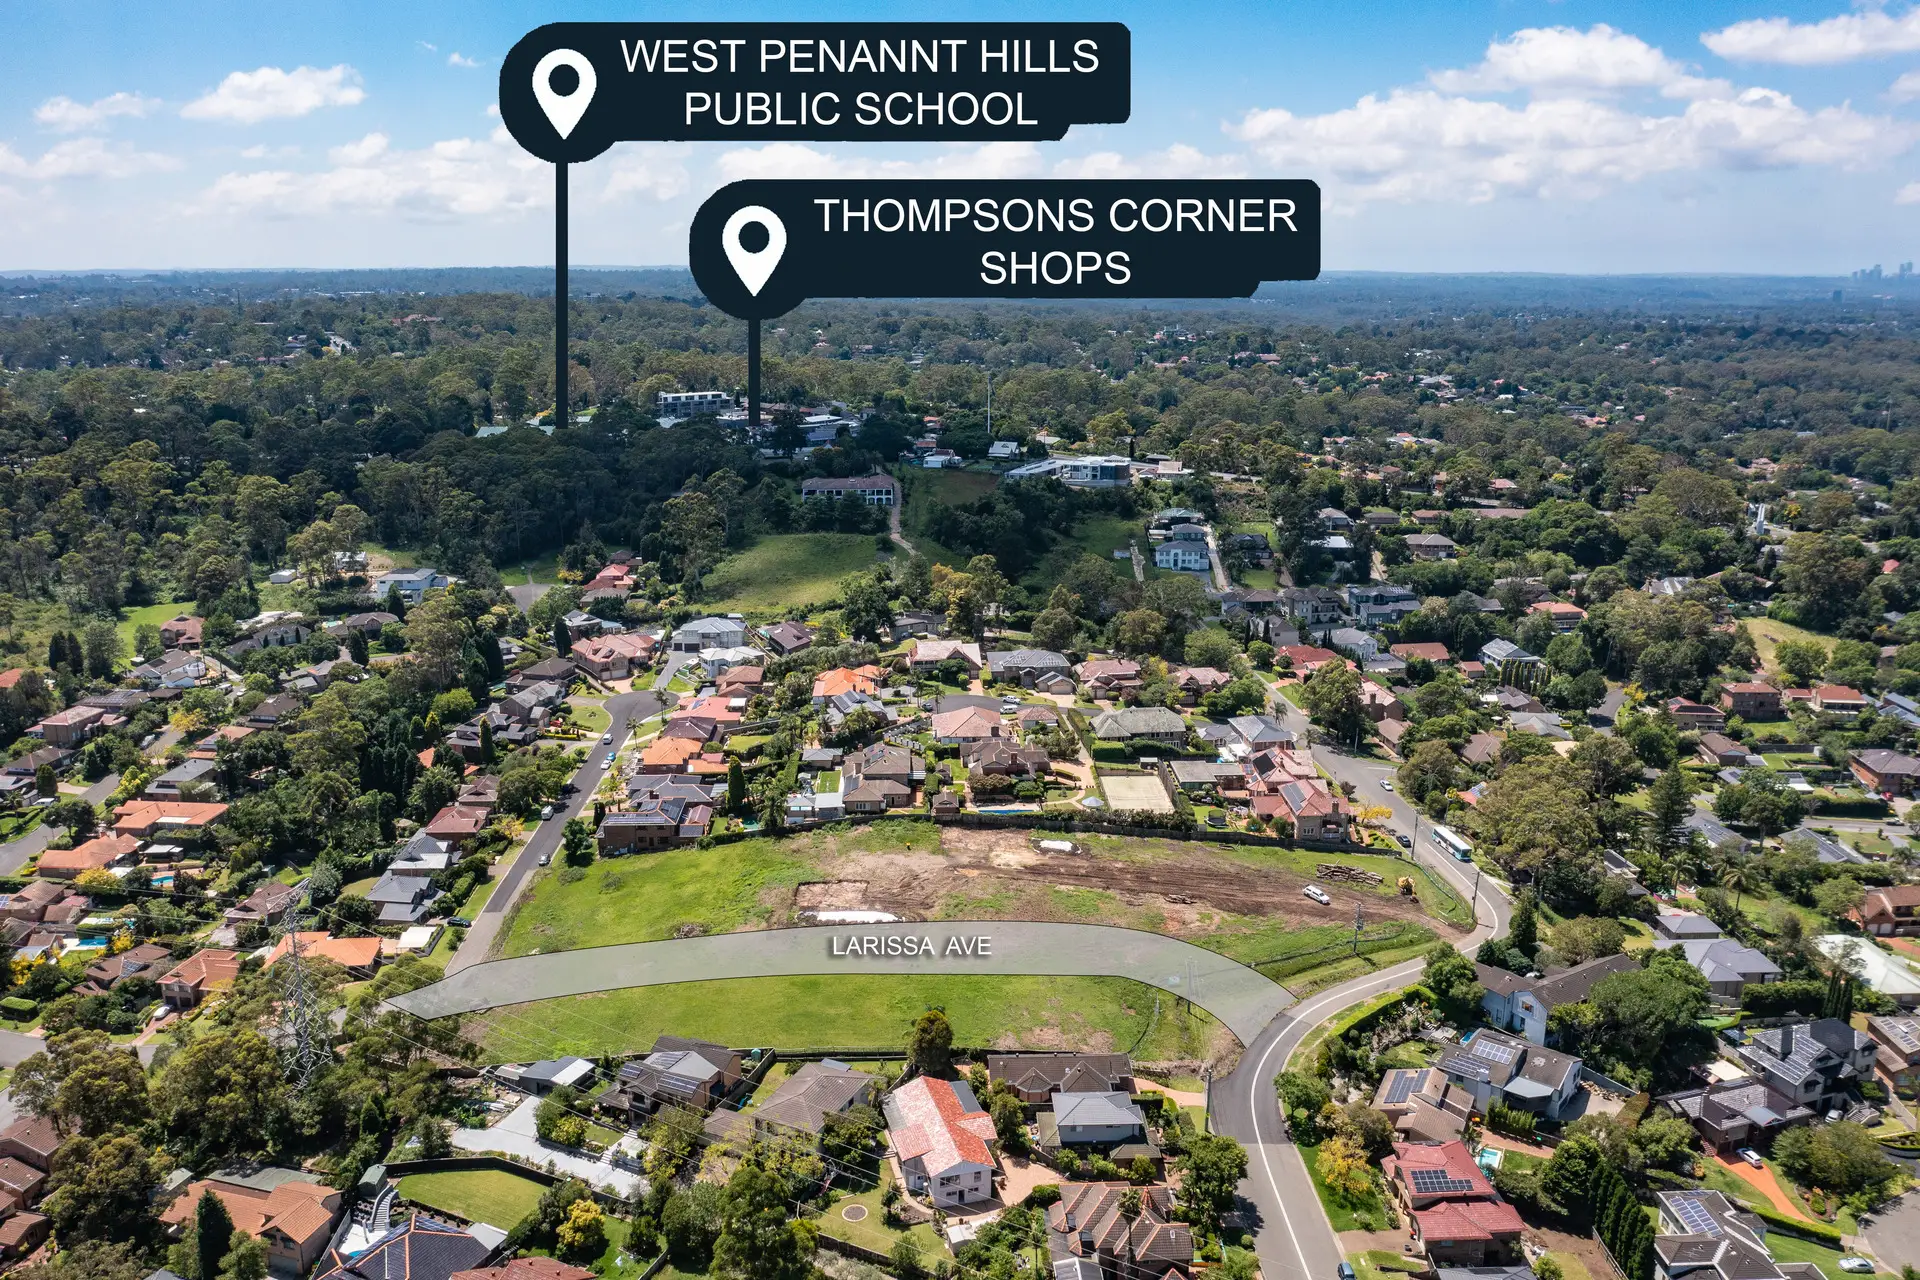 Photo #3: Lot 14, 79-87 Oratava Avenue, West Pennant Hills - For Sale by Louis Carr Real Estate